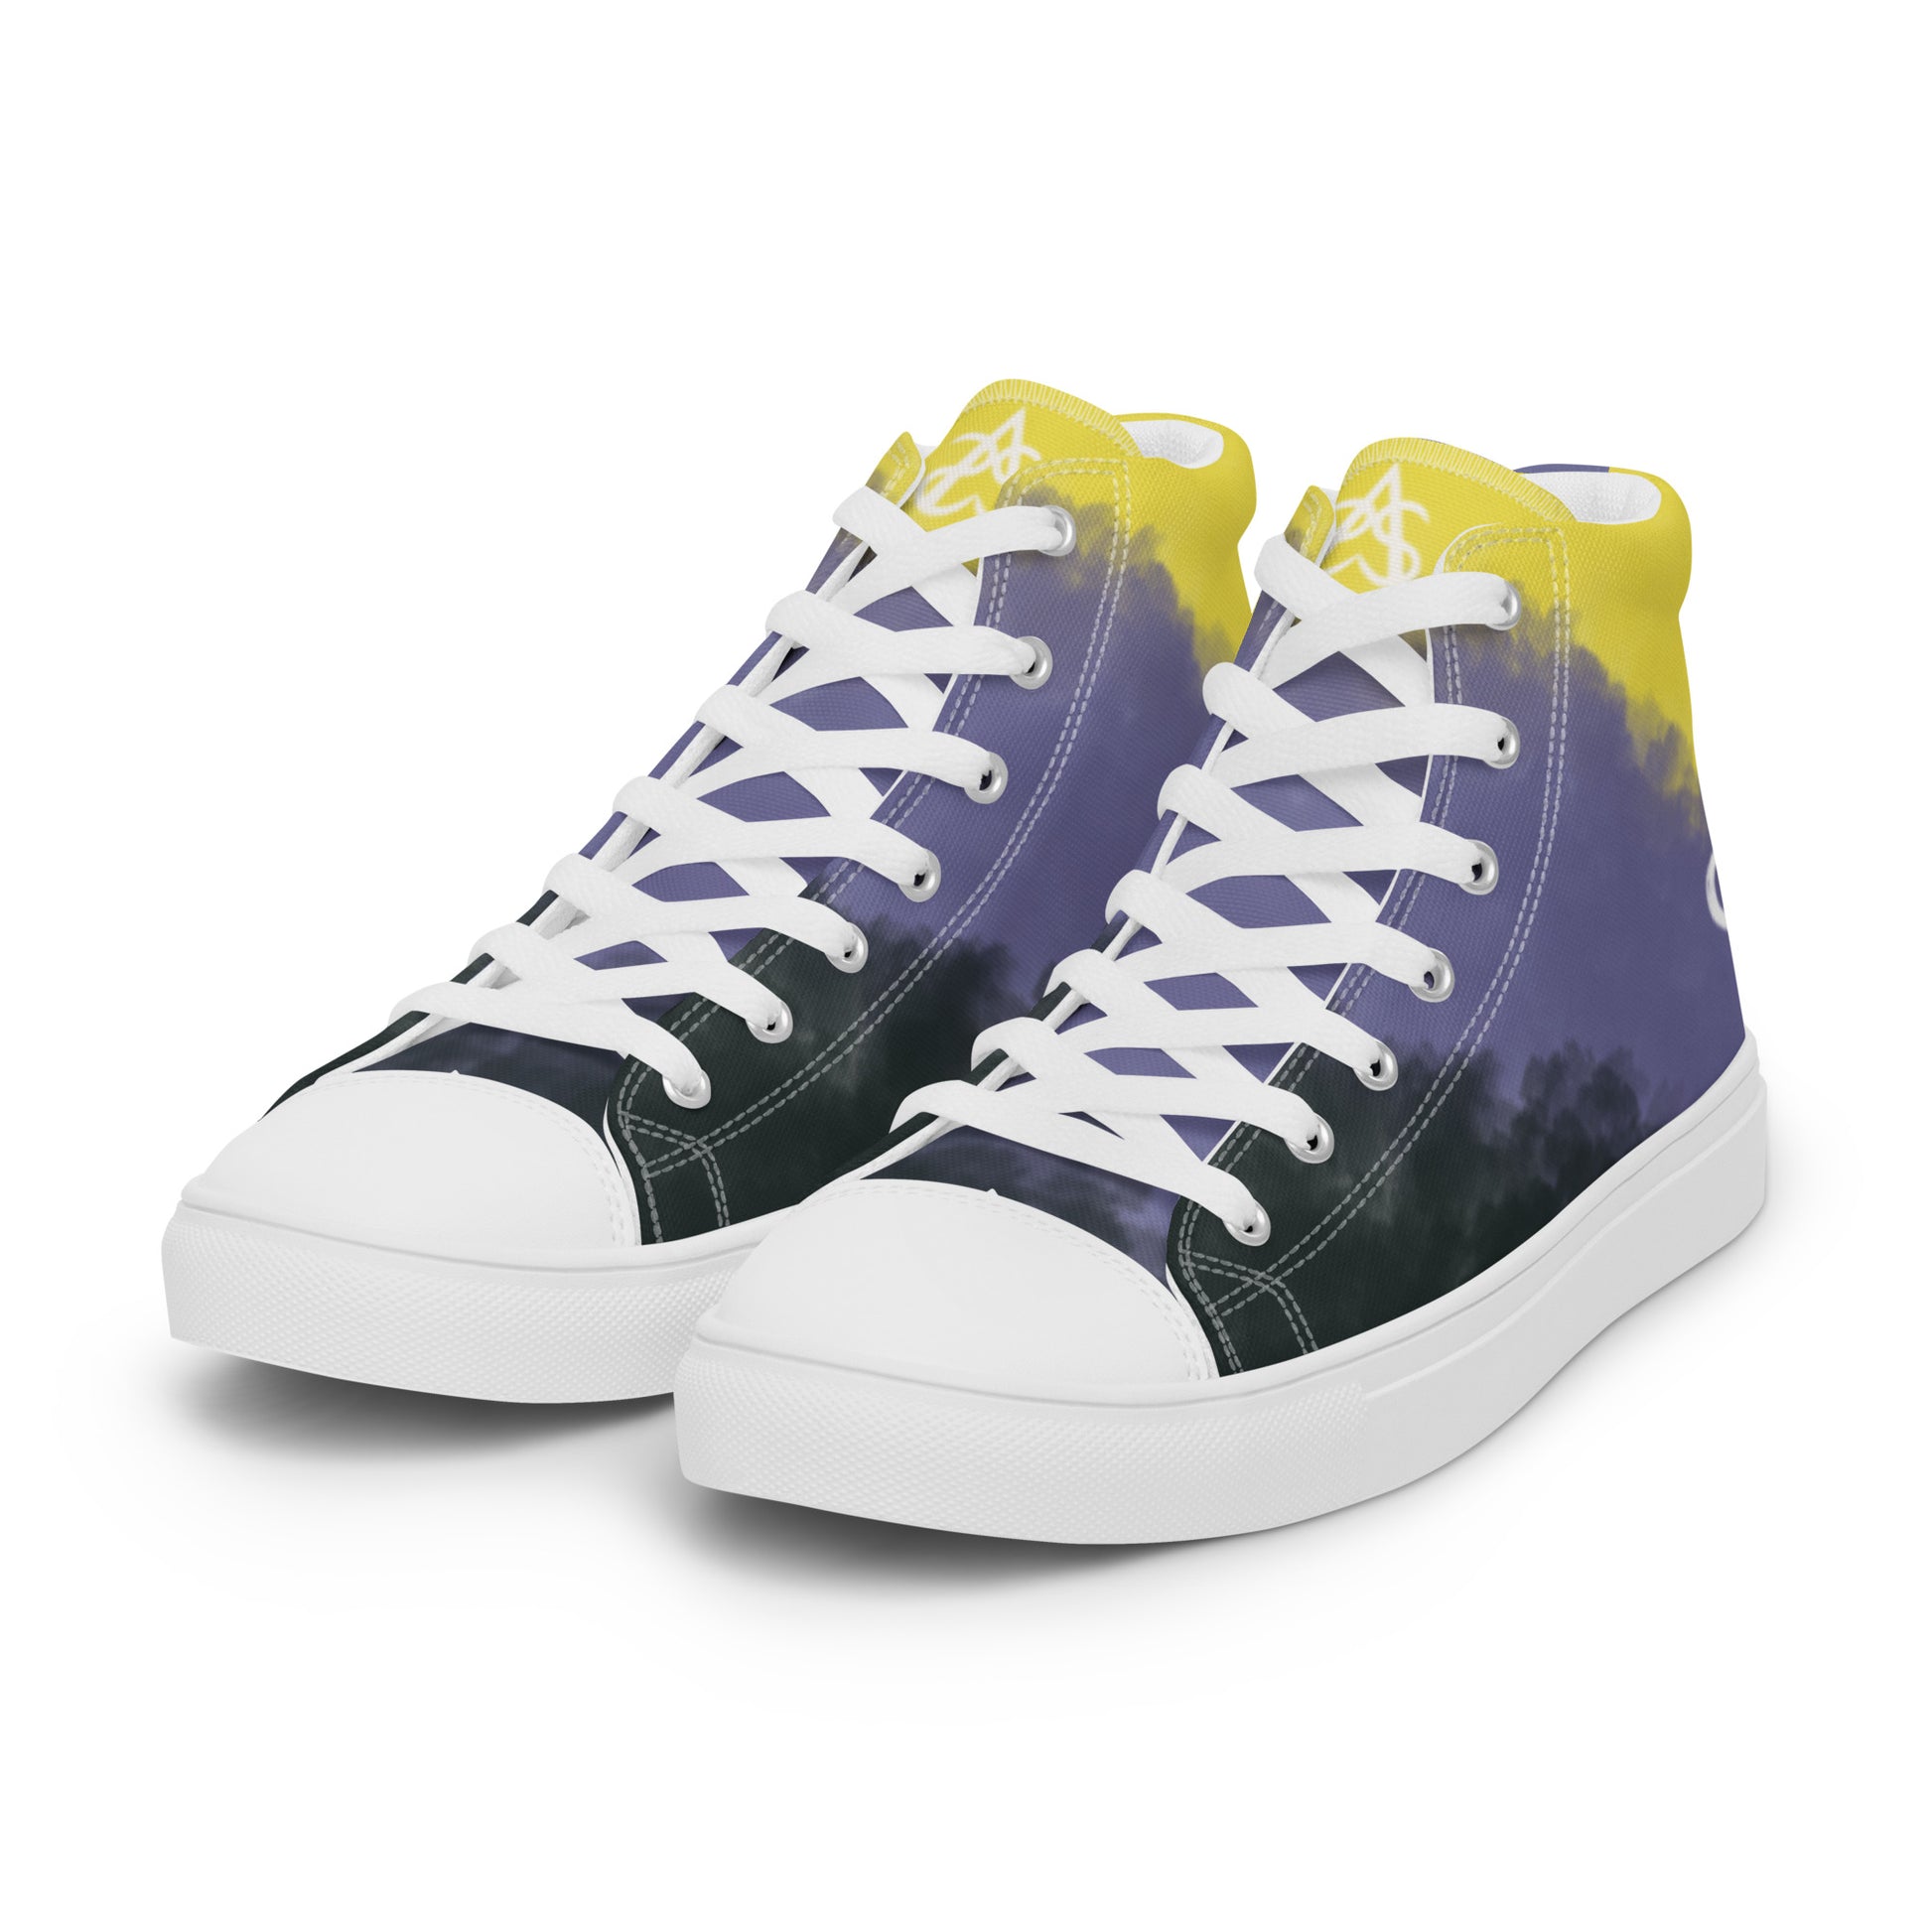 Left front view: a pair of high-top canvas shoes with cloudy color blocks of the yellow, purple, and black non-binary flag colors with white laces and accents, a white heart on the heel, and white Aras Sivad Studio logo on the tongue.